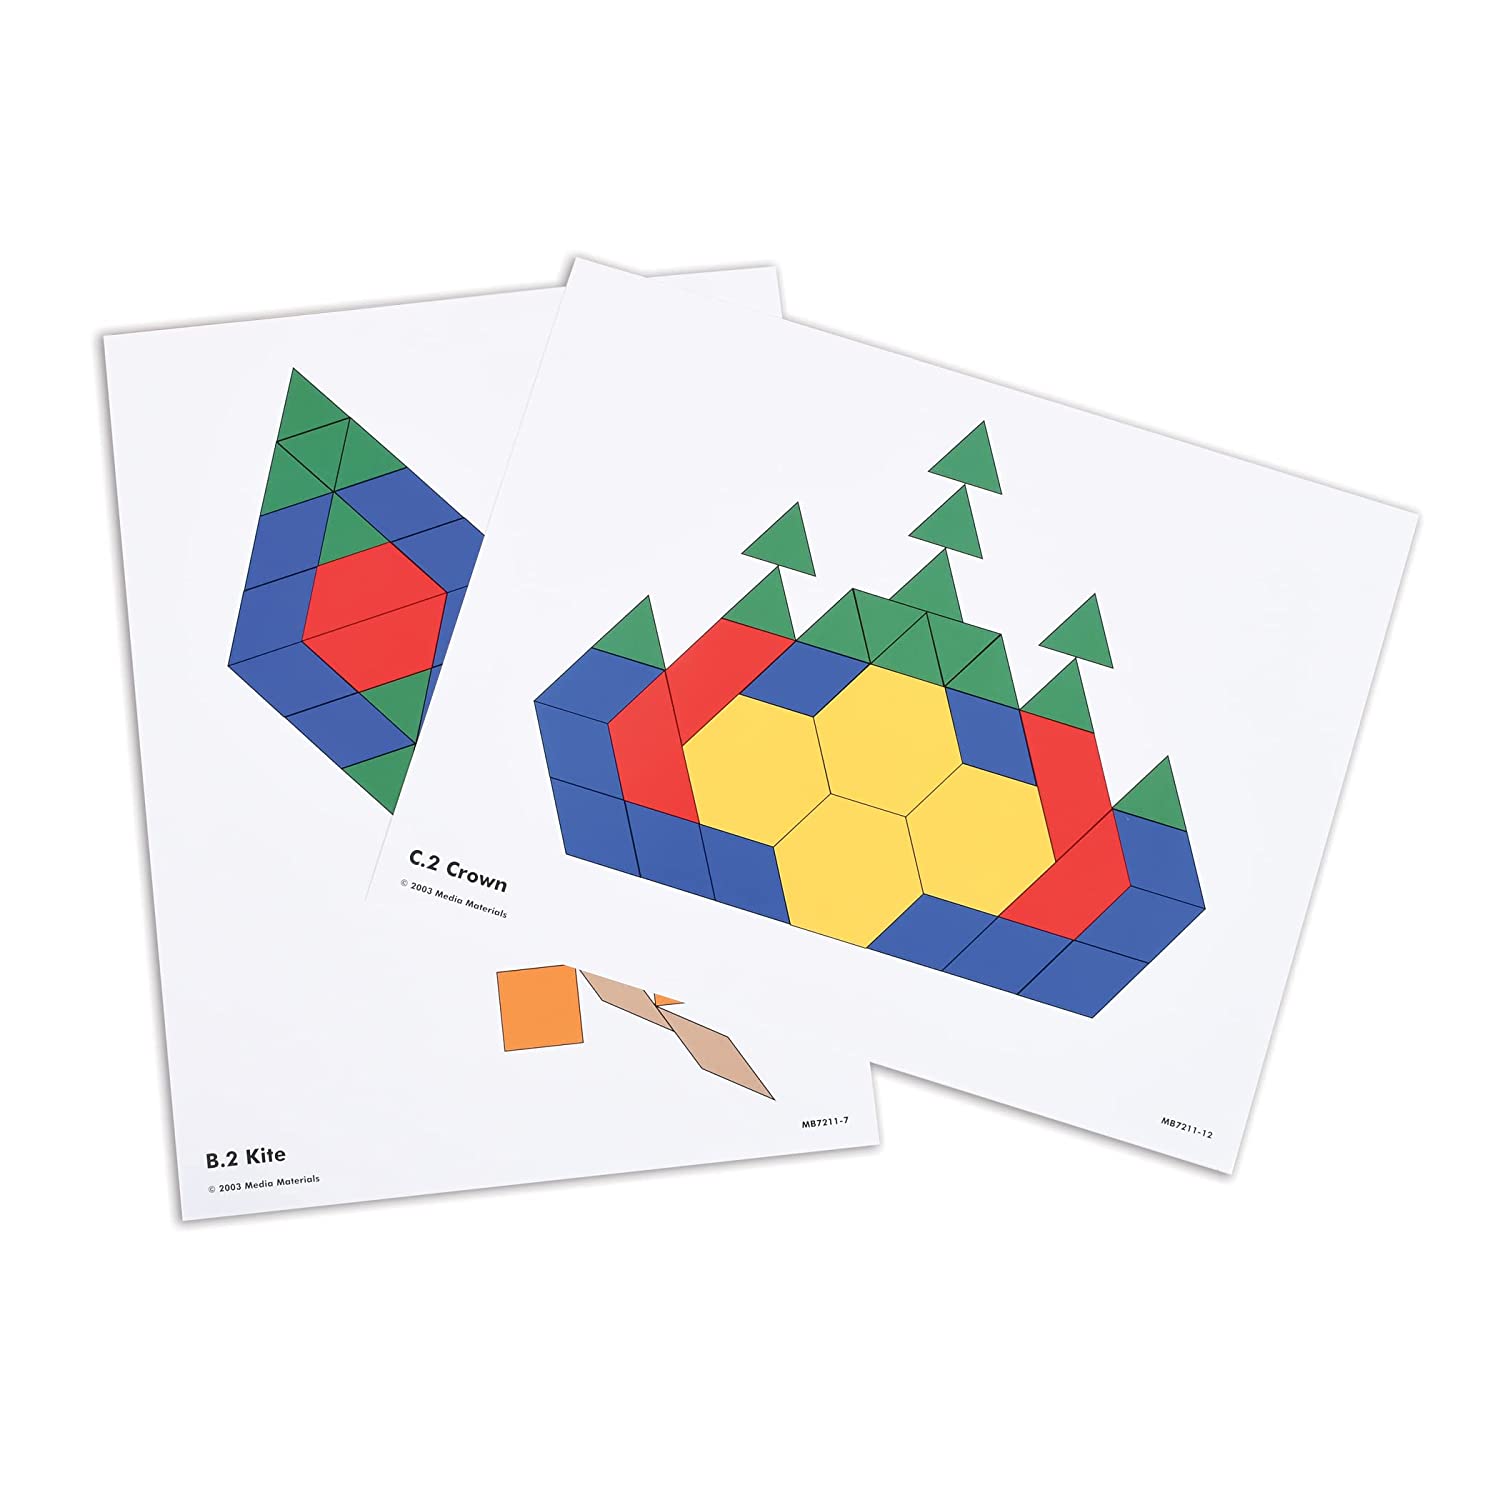 Learning Advantage Pattern Block Activity Cards - In-Home Learning Activity for Early Math &amp; Geometry - Set of 20 - Teach Creativity, Sequencing and Patterning